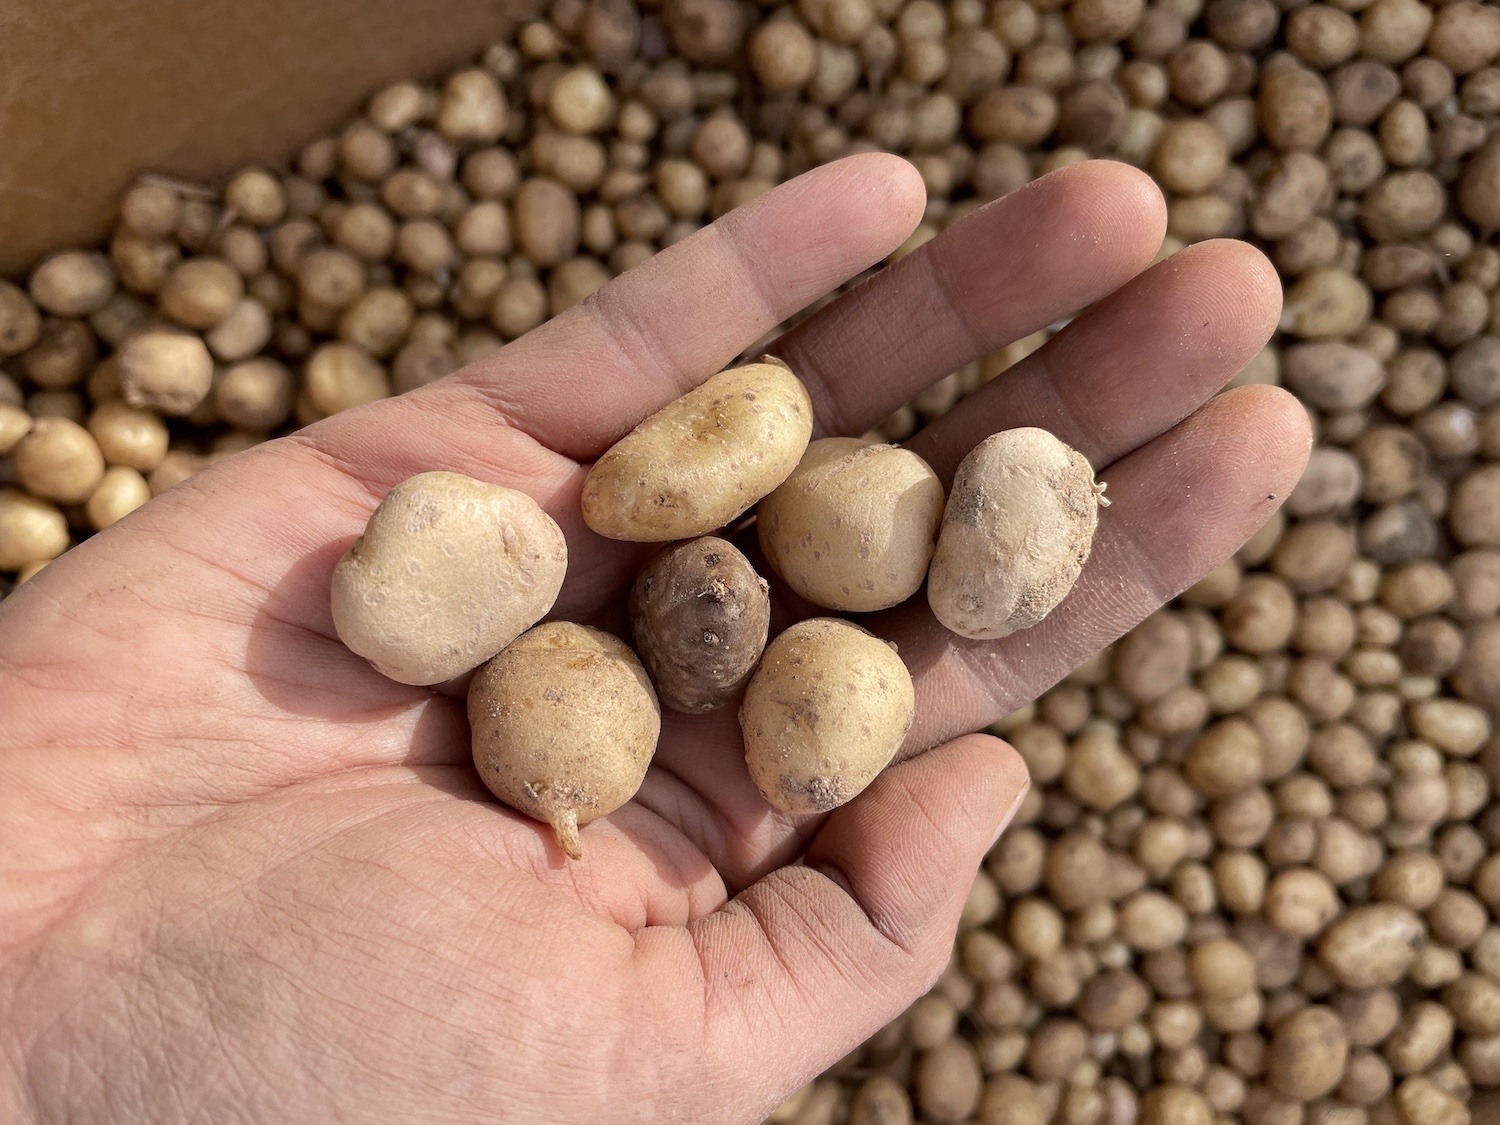 Cynthia Wilson holds a handful of Four Corners potatoes harvested from plants grown by a potato cultivation partner in Tséyi, Arizona.